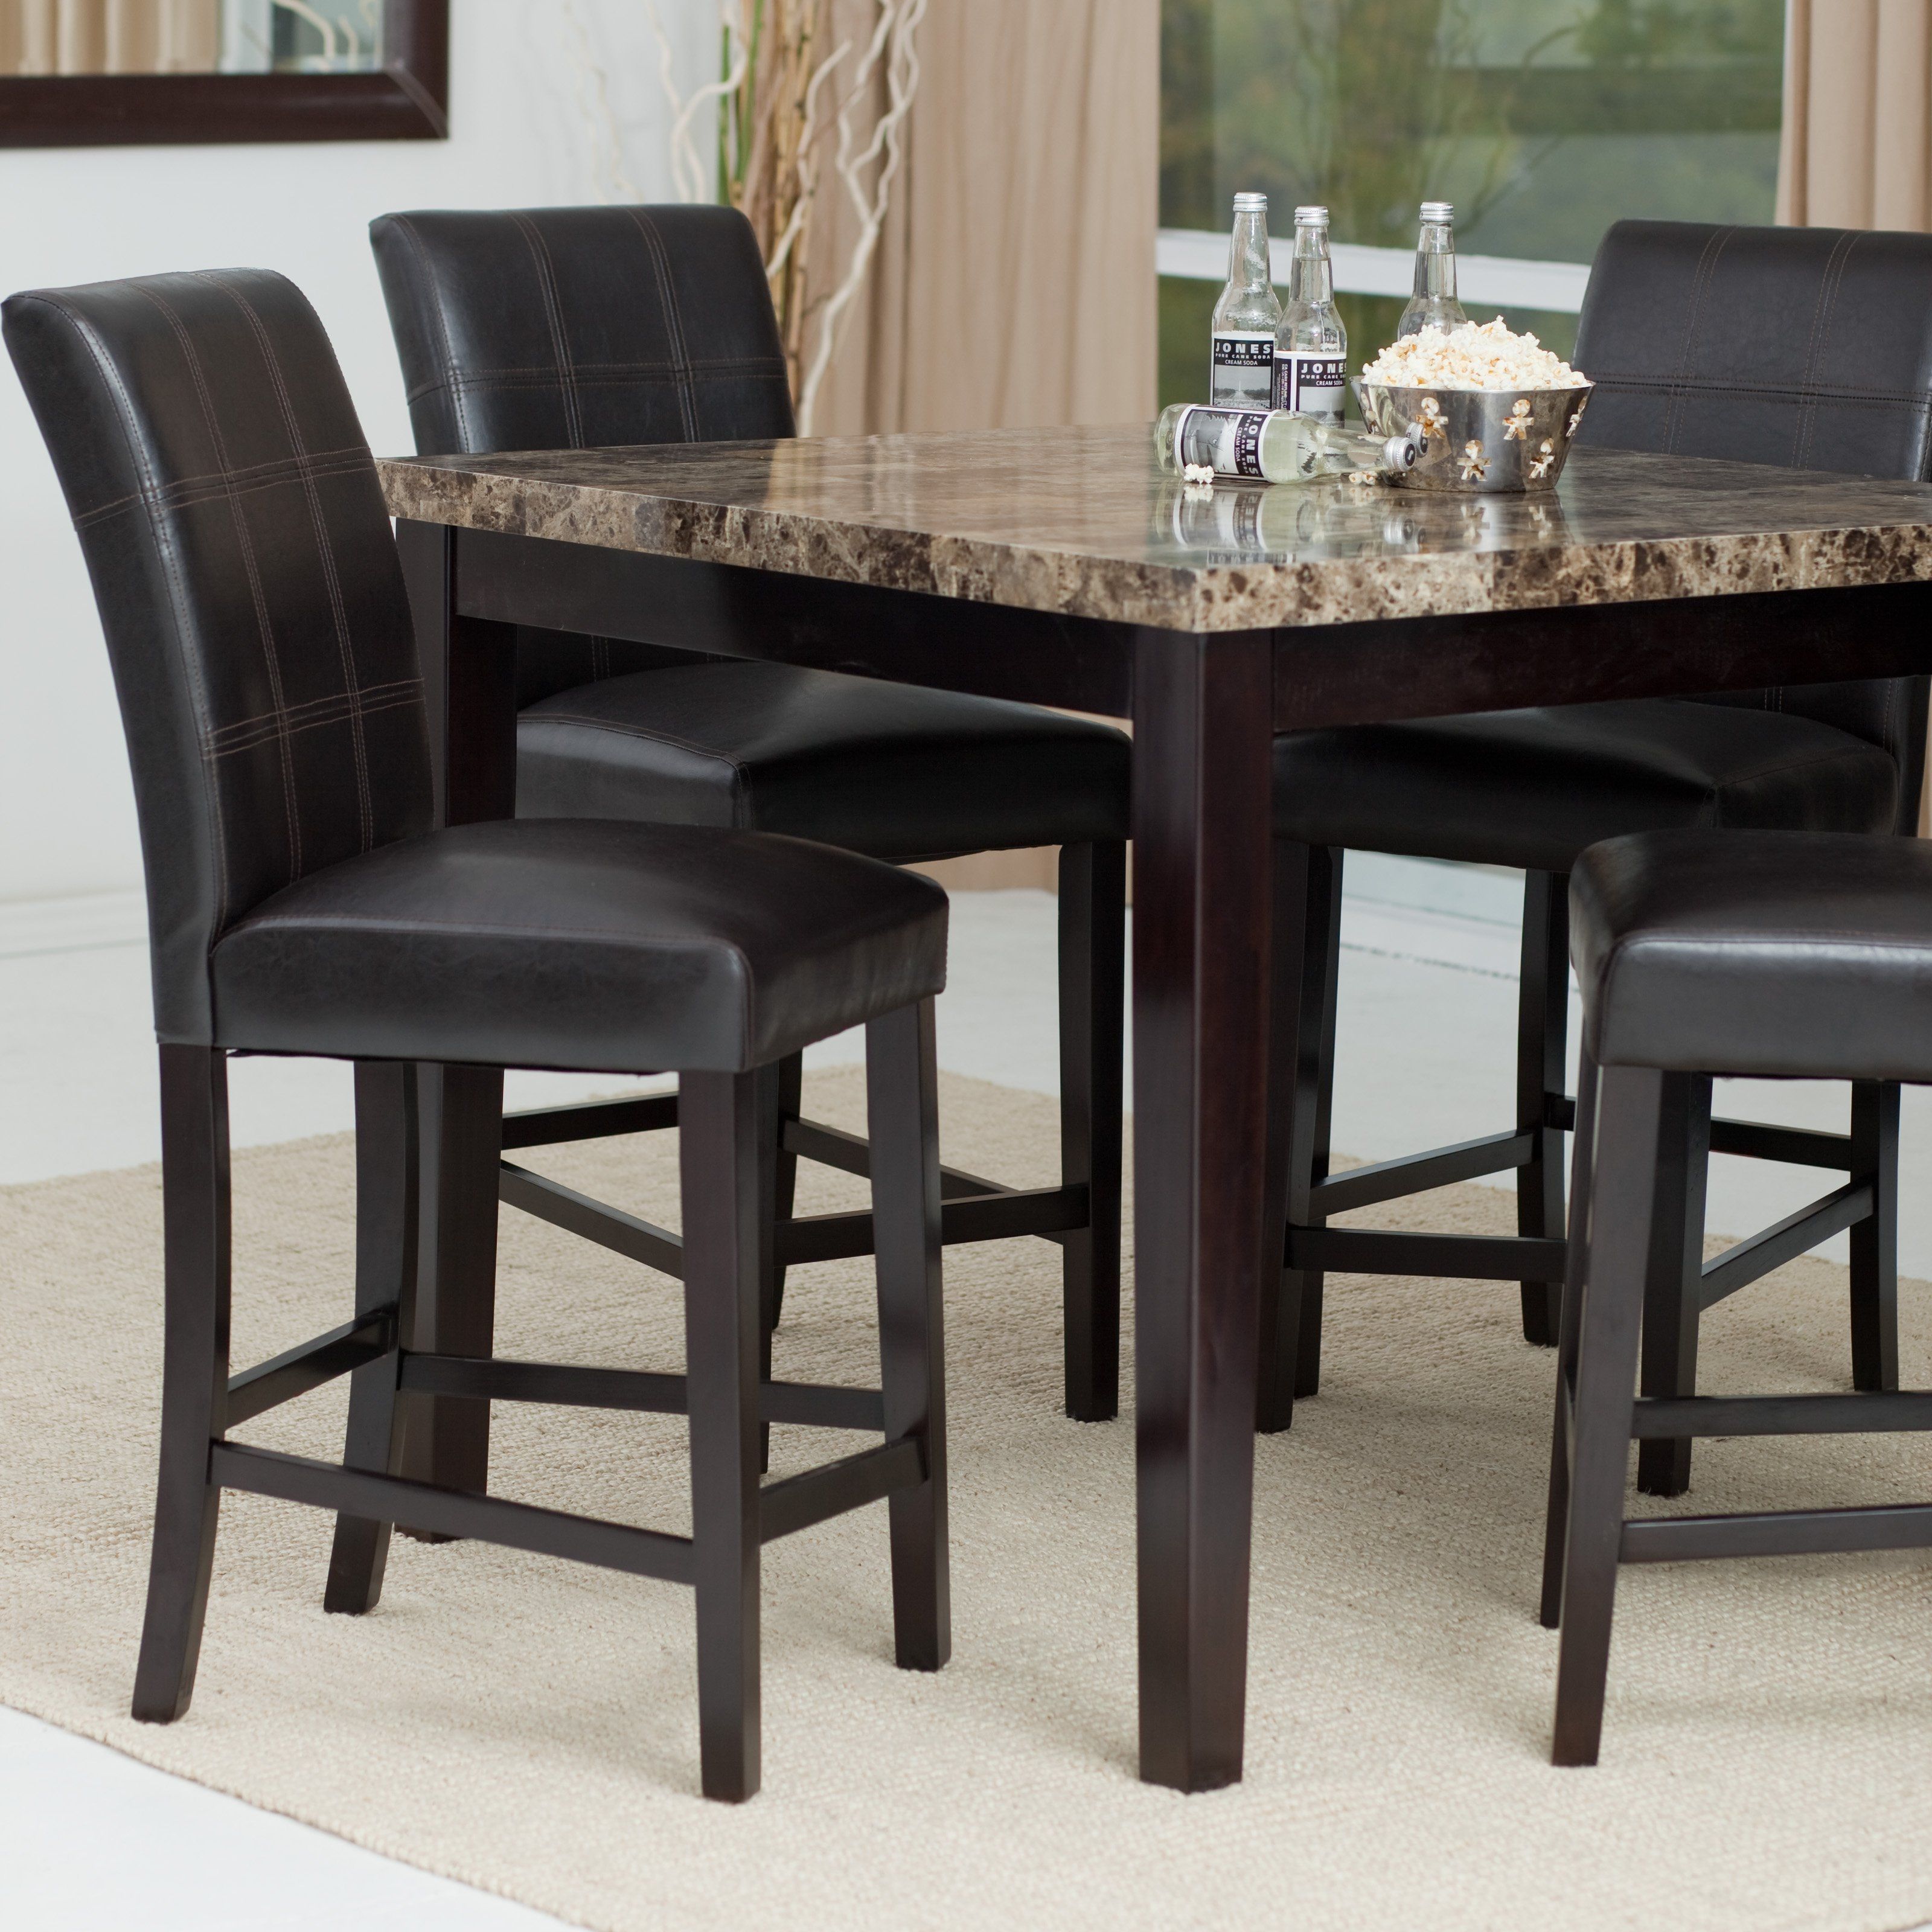 Have To Have It. Palazzo 5 Piece Counter Height Dining Set – $ (View 5 of 20)